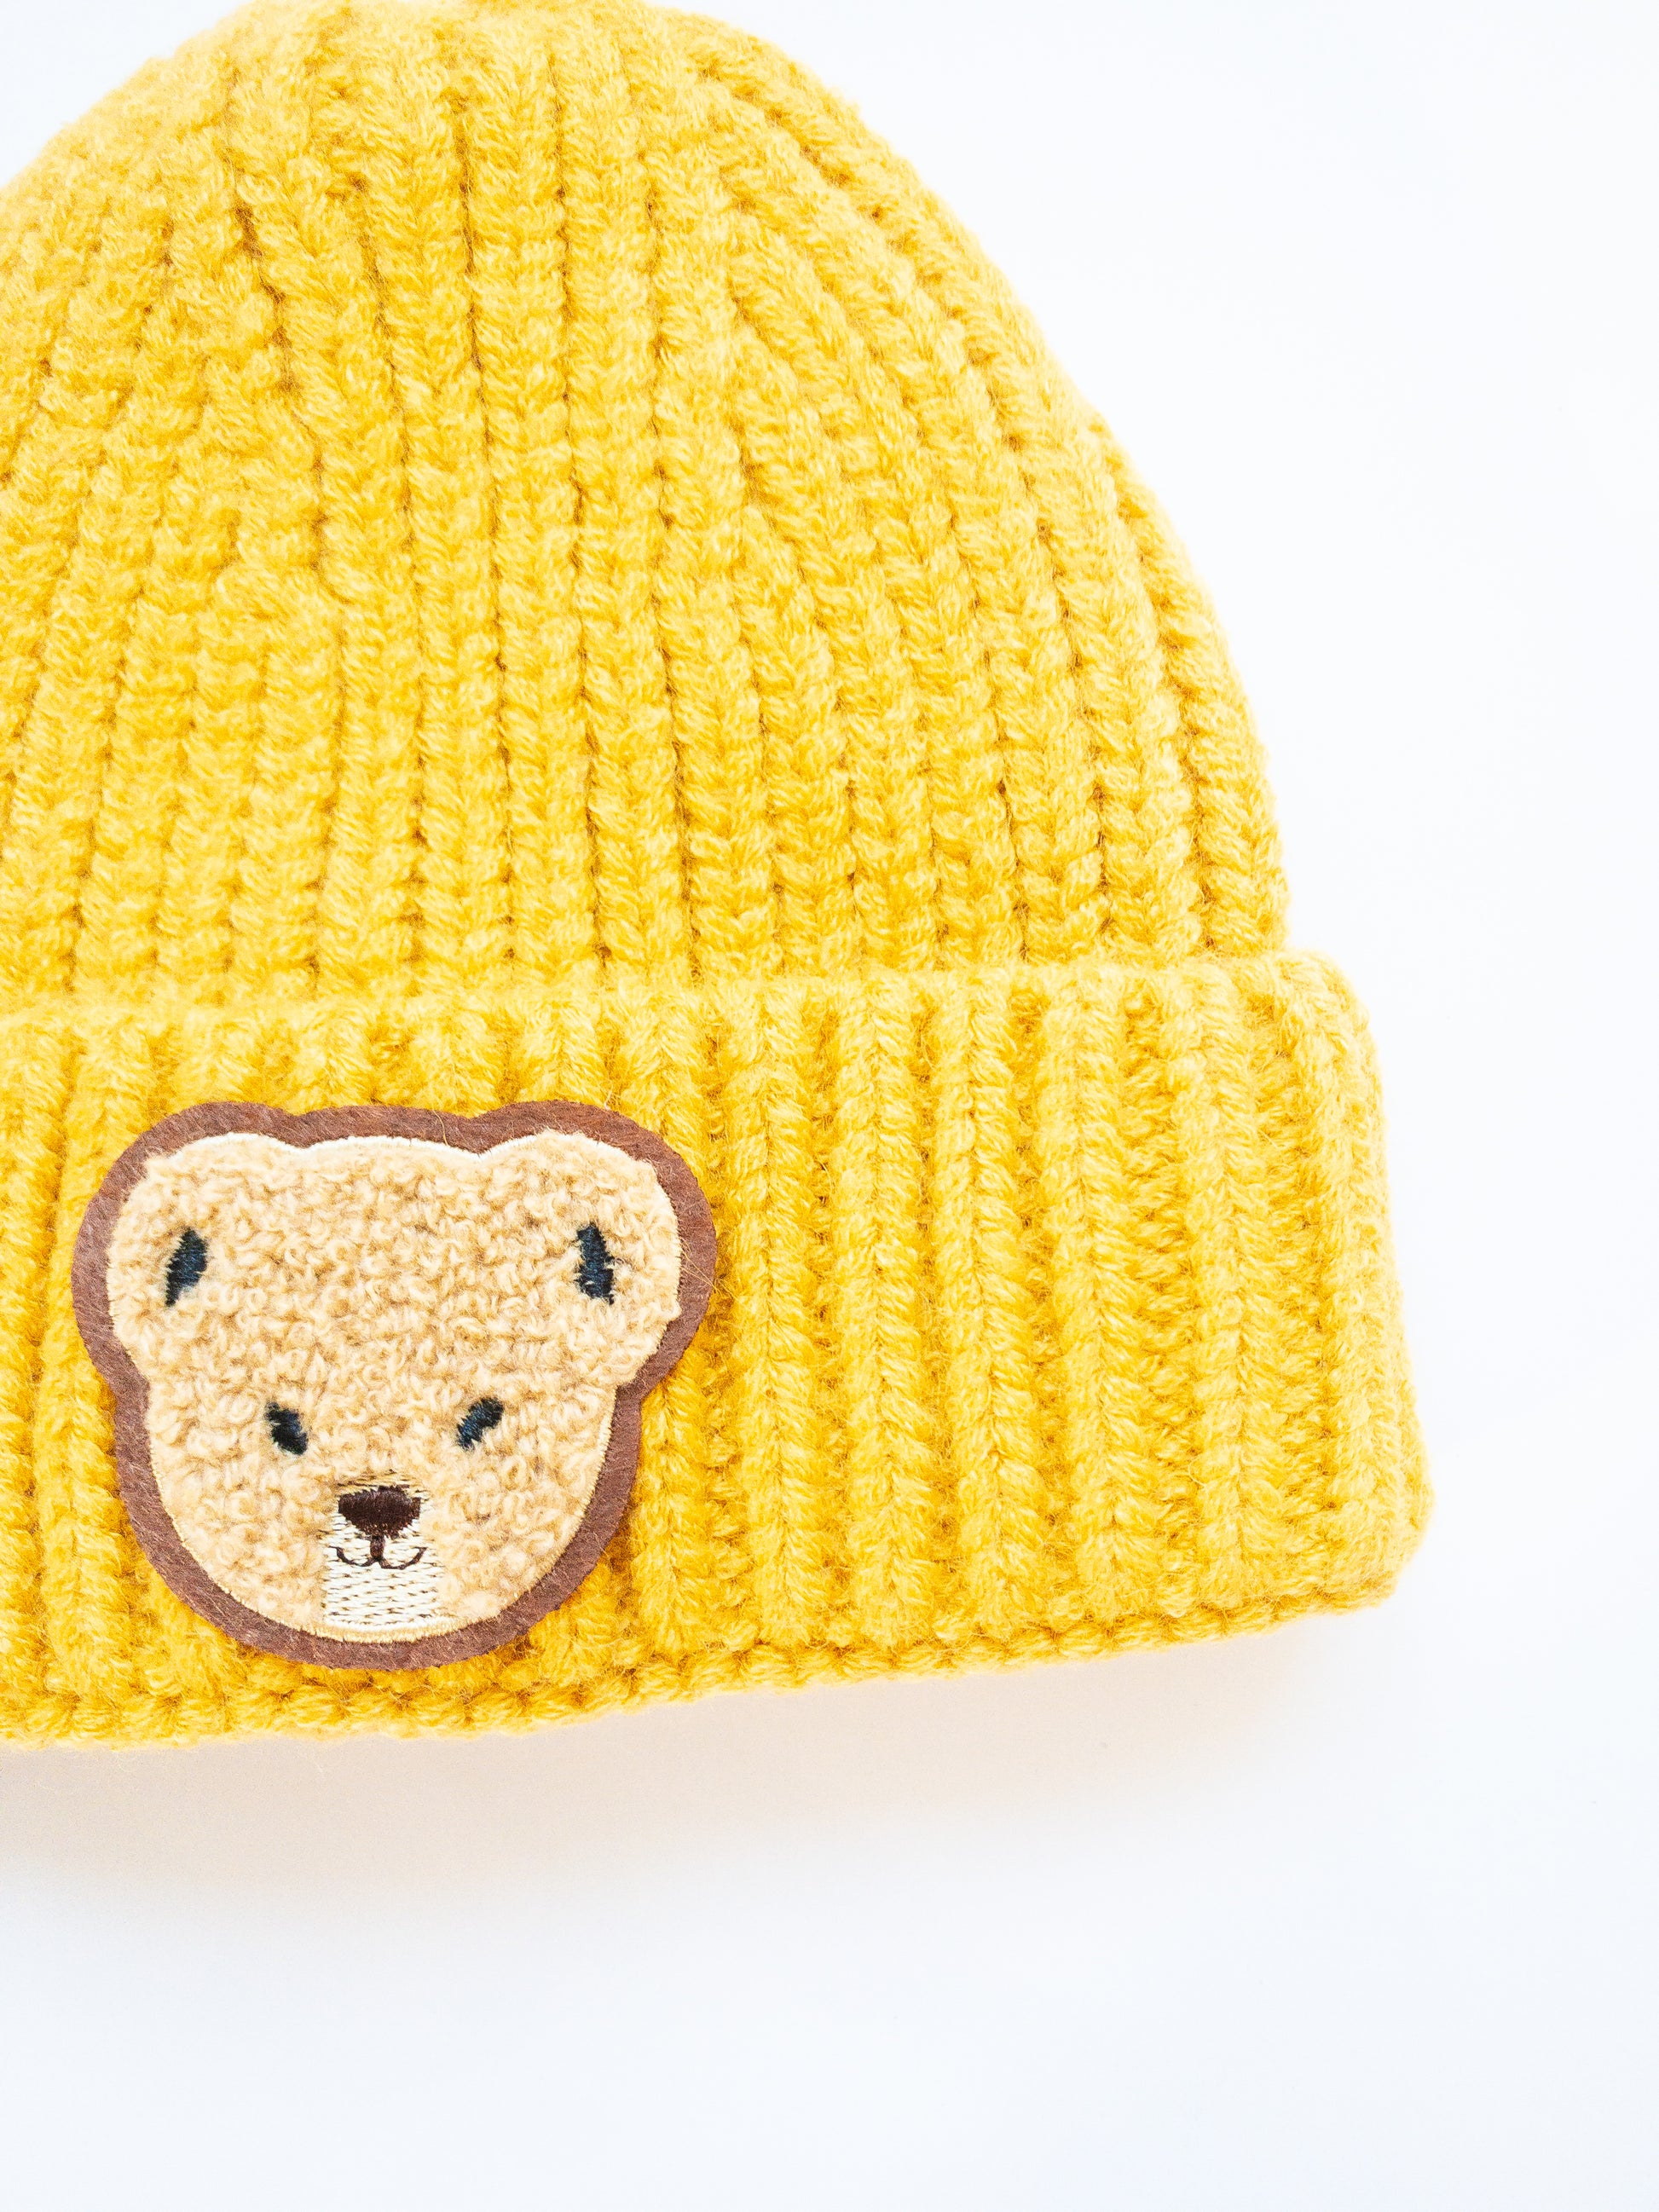 Luxuriously soft, stretchy and thick kids beanie with a cute sherpa bear cub patch. This beanie is already so soft but add in the lining on the inside and it'll keep your child warm and comfortable.